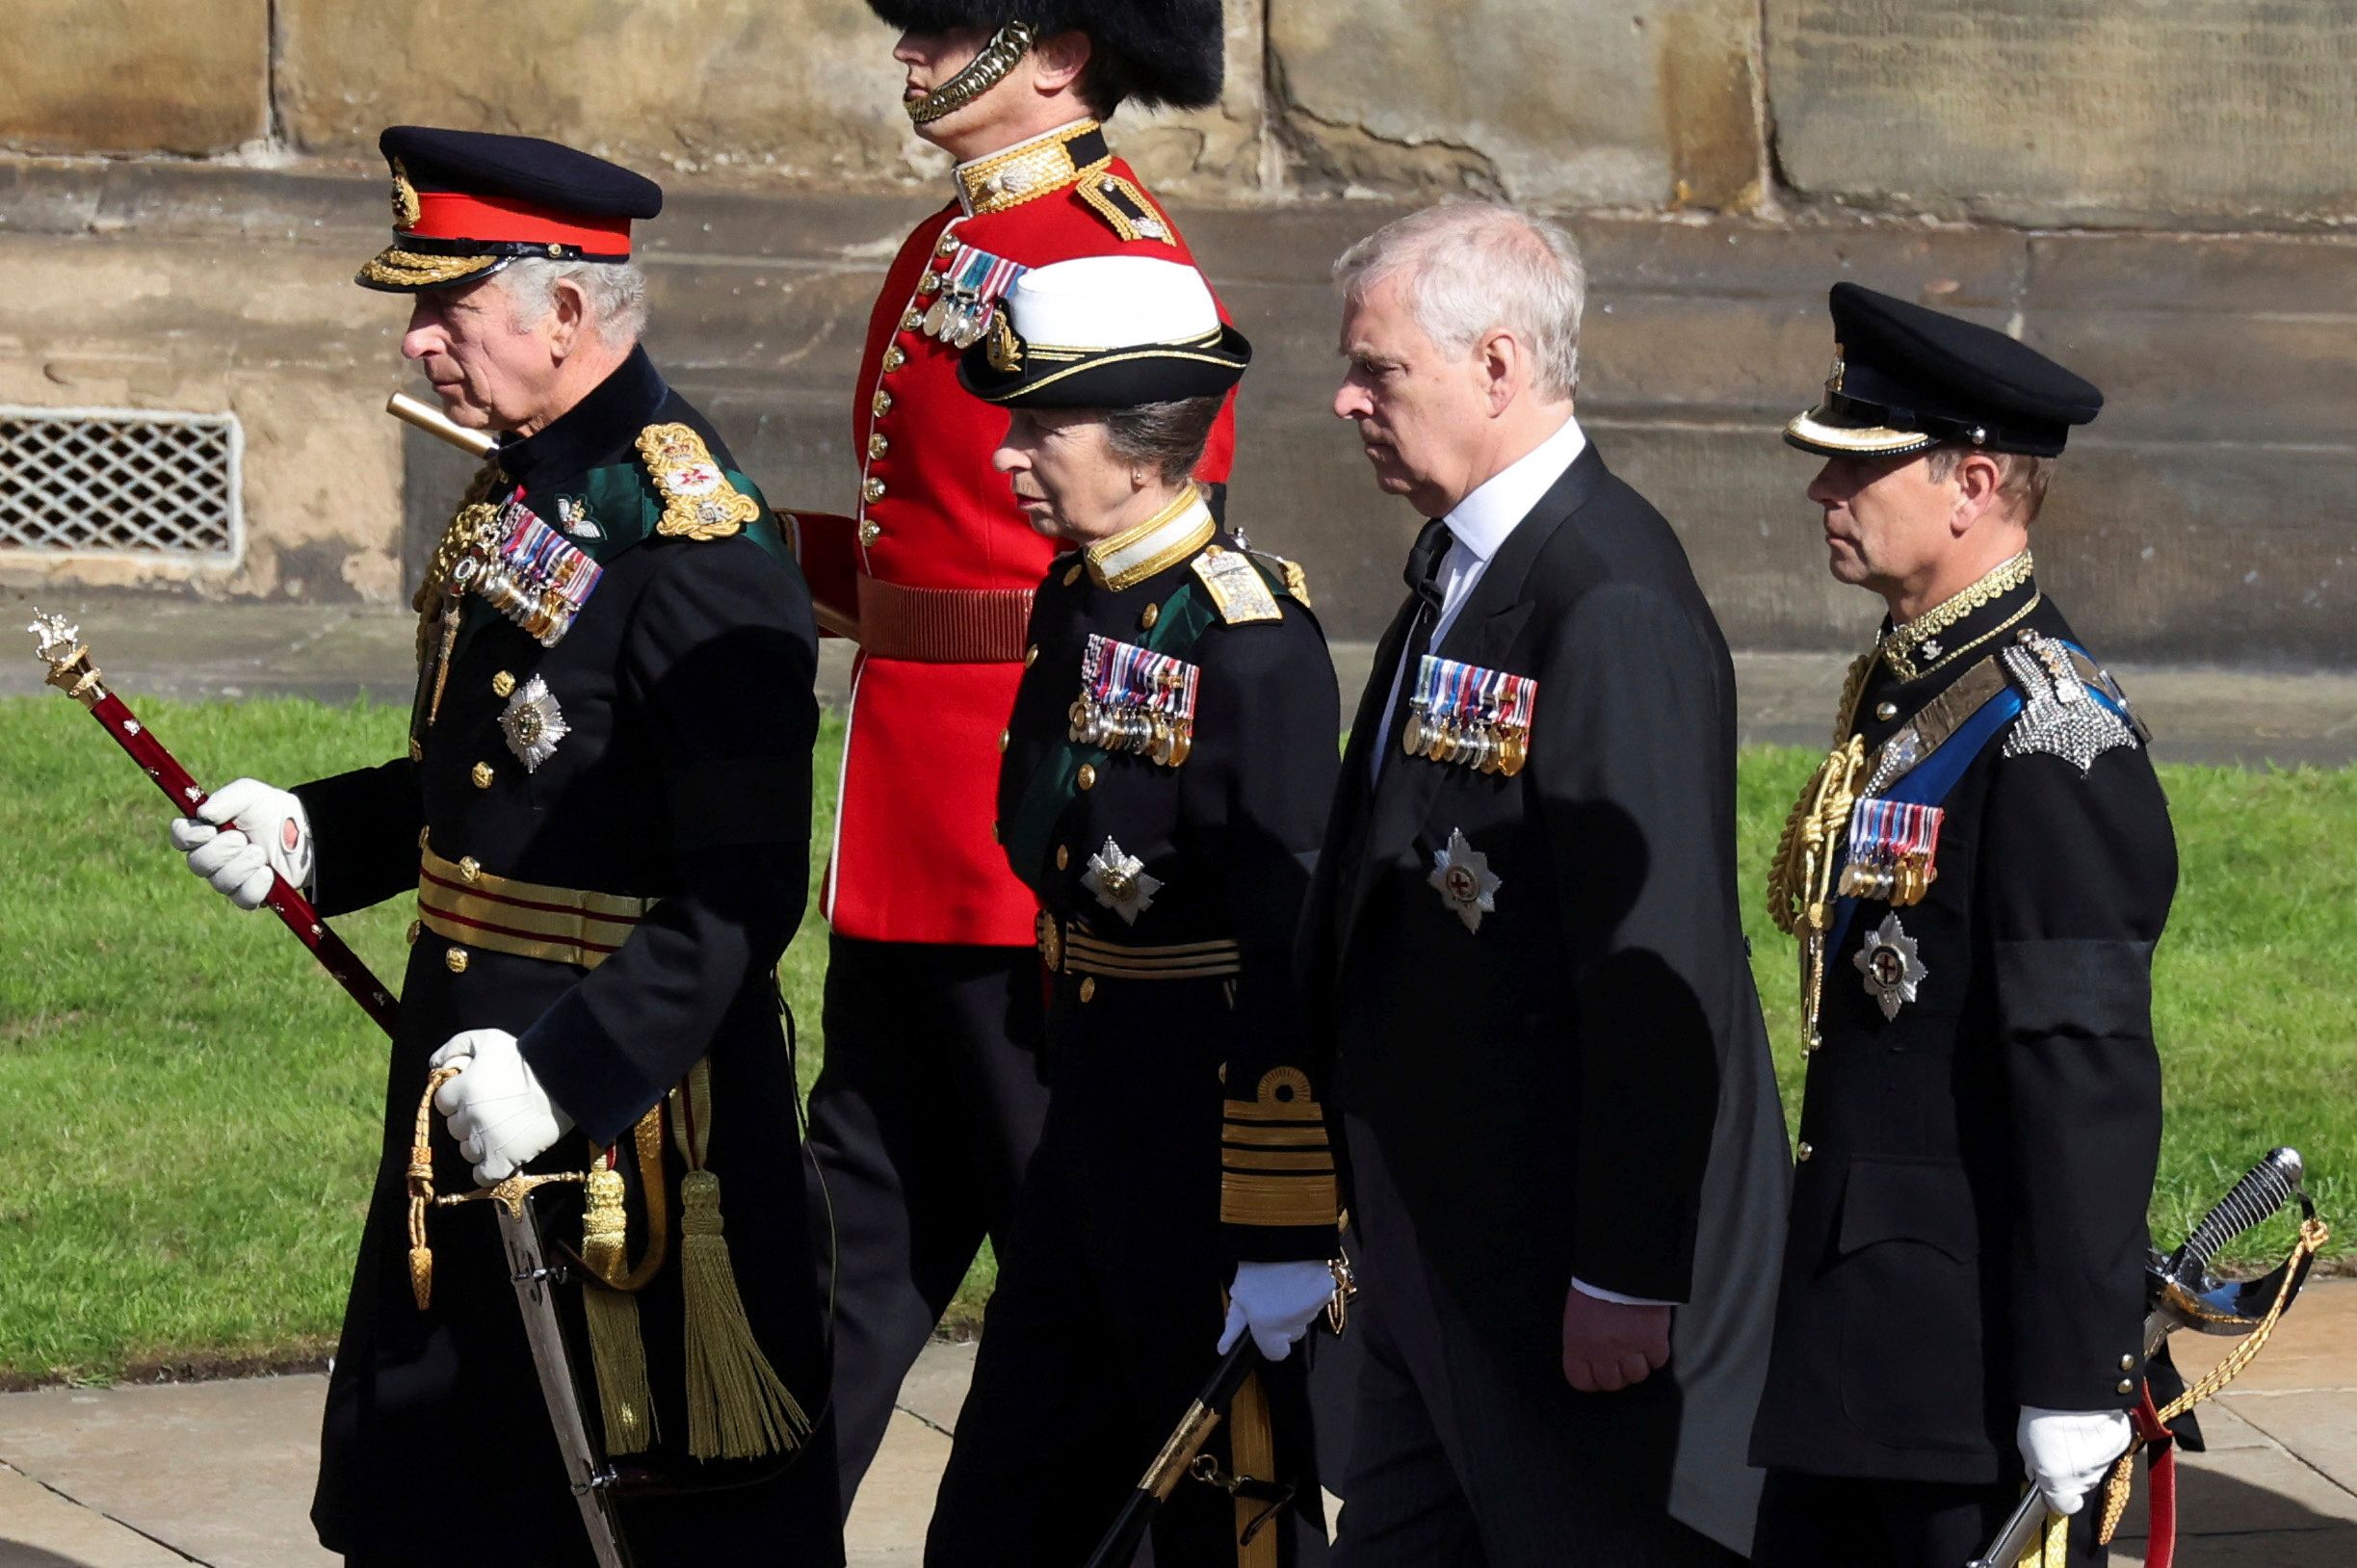 <p>Queen Elizabeth II's four children -- King Charles III, Princess Anne, Prince Andrew and Prince Edward -- walked behind the hearse carrying her coffin in Edinburgh, Scotland, on Sept. 12, 2022 -- four days after <a href="https://www.wonderwall.com/celebrity/celebrities-dignitaries-react-to-death-of-queen-elizabeth-ii-647756.gallery">her death at Balmoral</a> in the Scottish Highlands. Charles accompanied his mother's body in a solemn procession through the cobbled streets of the Scottish capital from the royal Palace of Holyroodhouse to St. Giles' Cathedral, where members of the public came to pay their respects before the queen's coffin headed to London for her funeral. Andrew, who served 22 years in the Royal Navy, was the only one of his siblings not in uniform -- though he did wear his medals -- as he was stripped of his military titles in early 2022 before settling a civil sexual abuse lawsuit.</p>